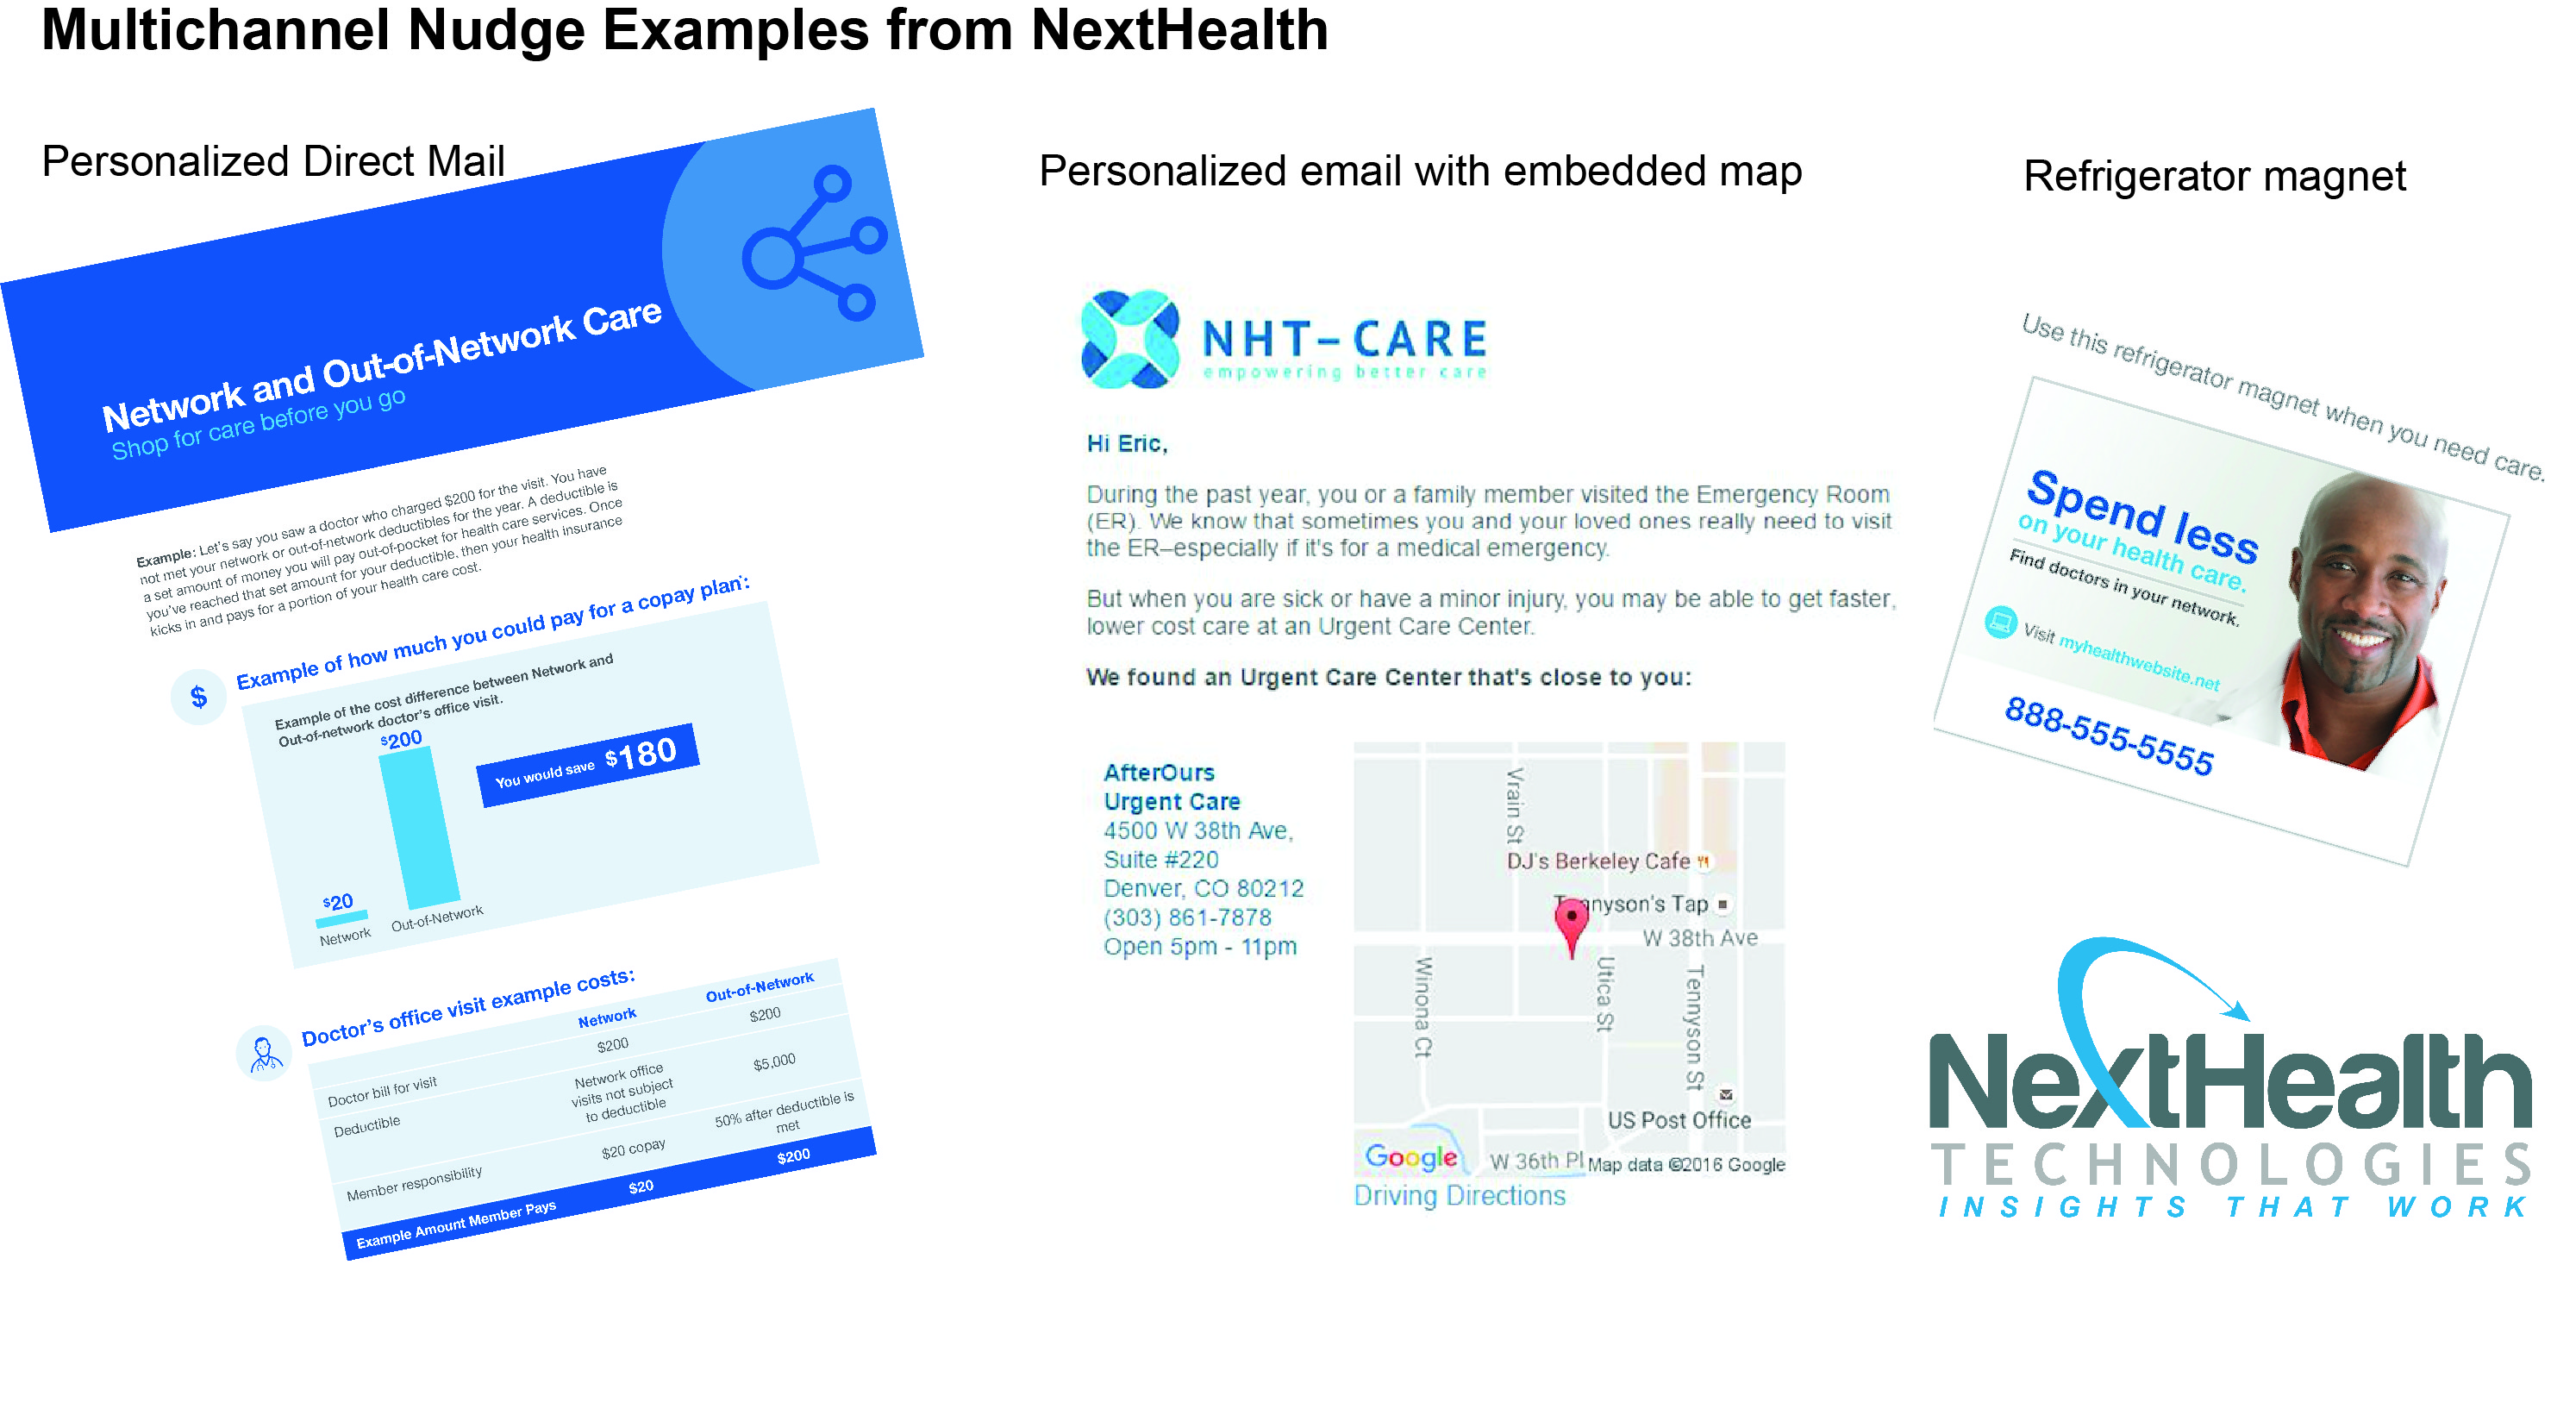 NHT Nudge Examples